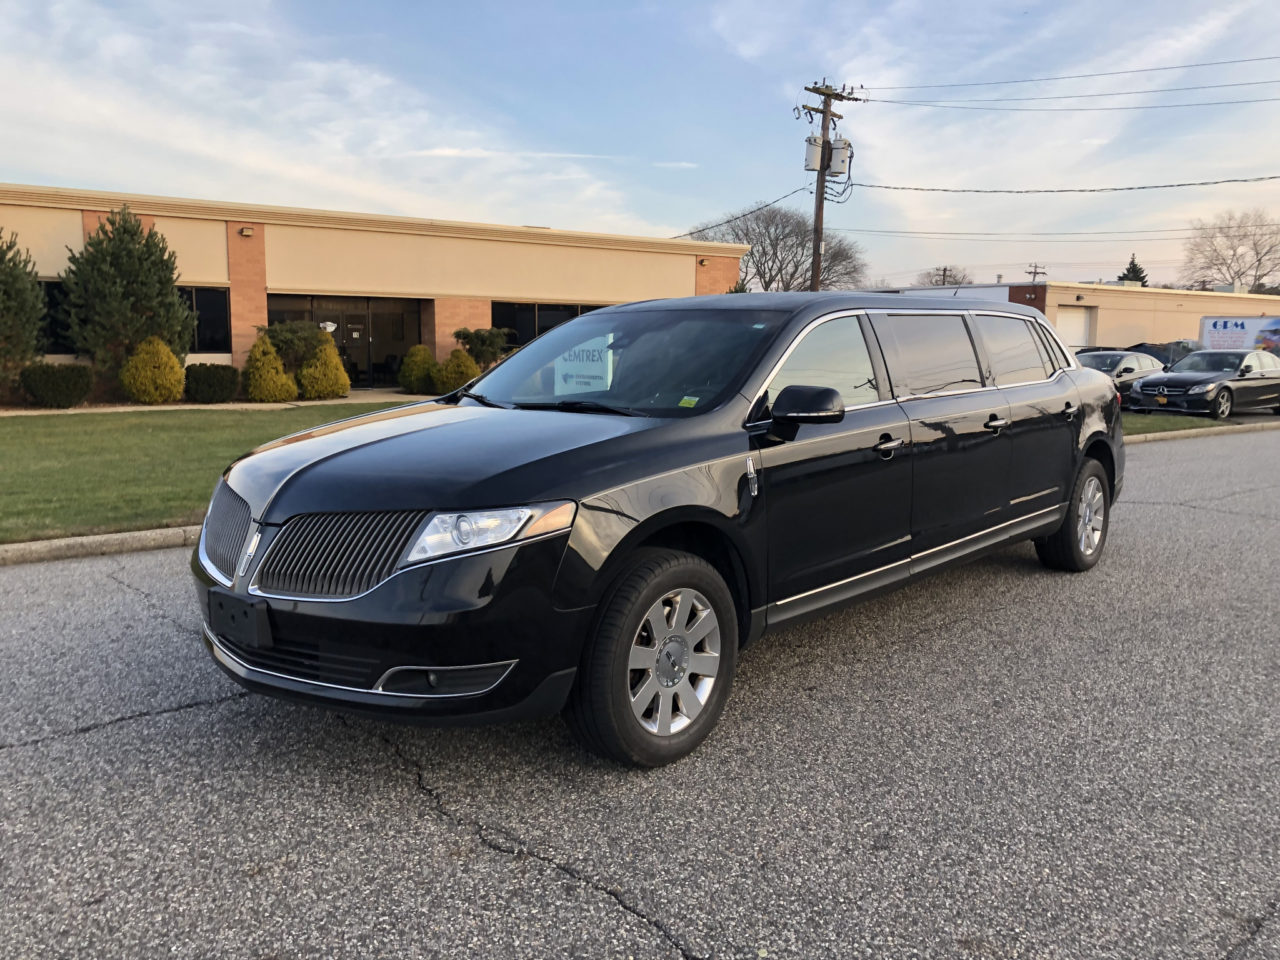 2013 LINCOLN SUPERIOR SIX DOOR TRUNK USED FUNERAL LIMOUSINE